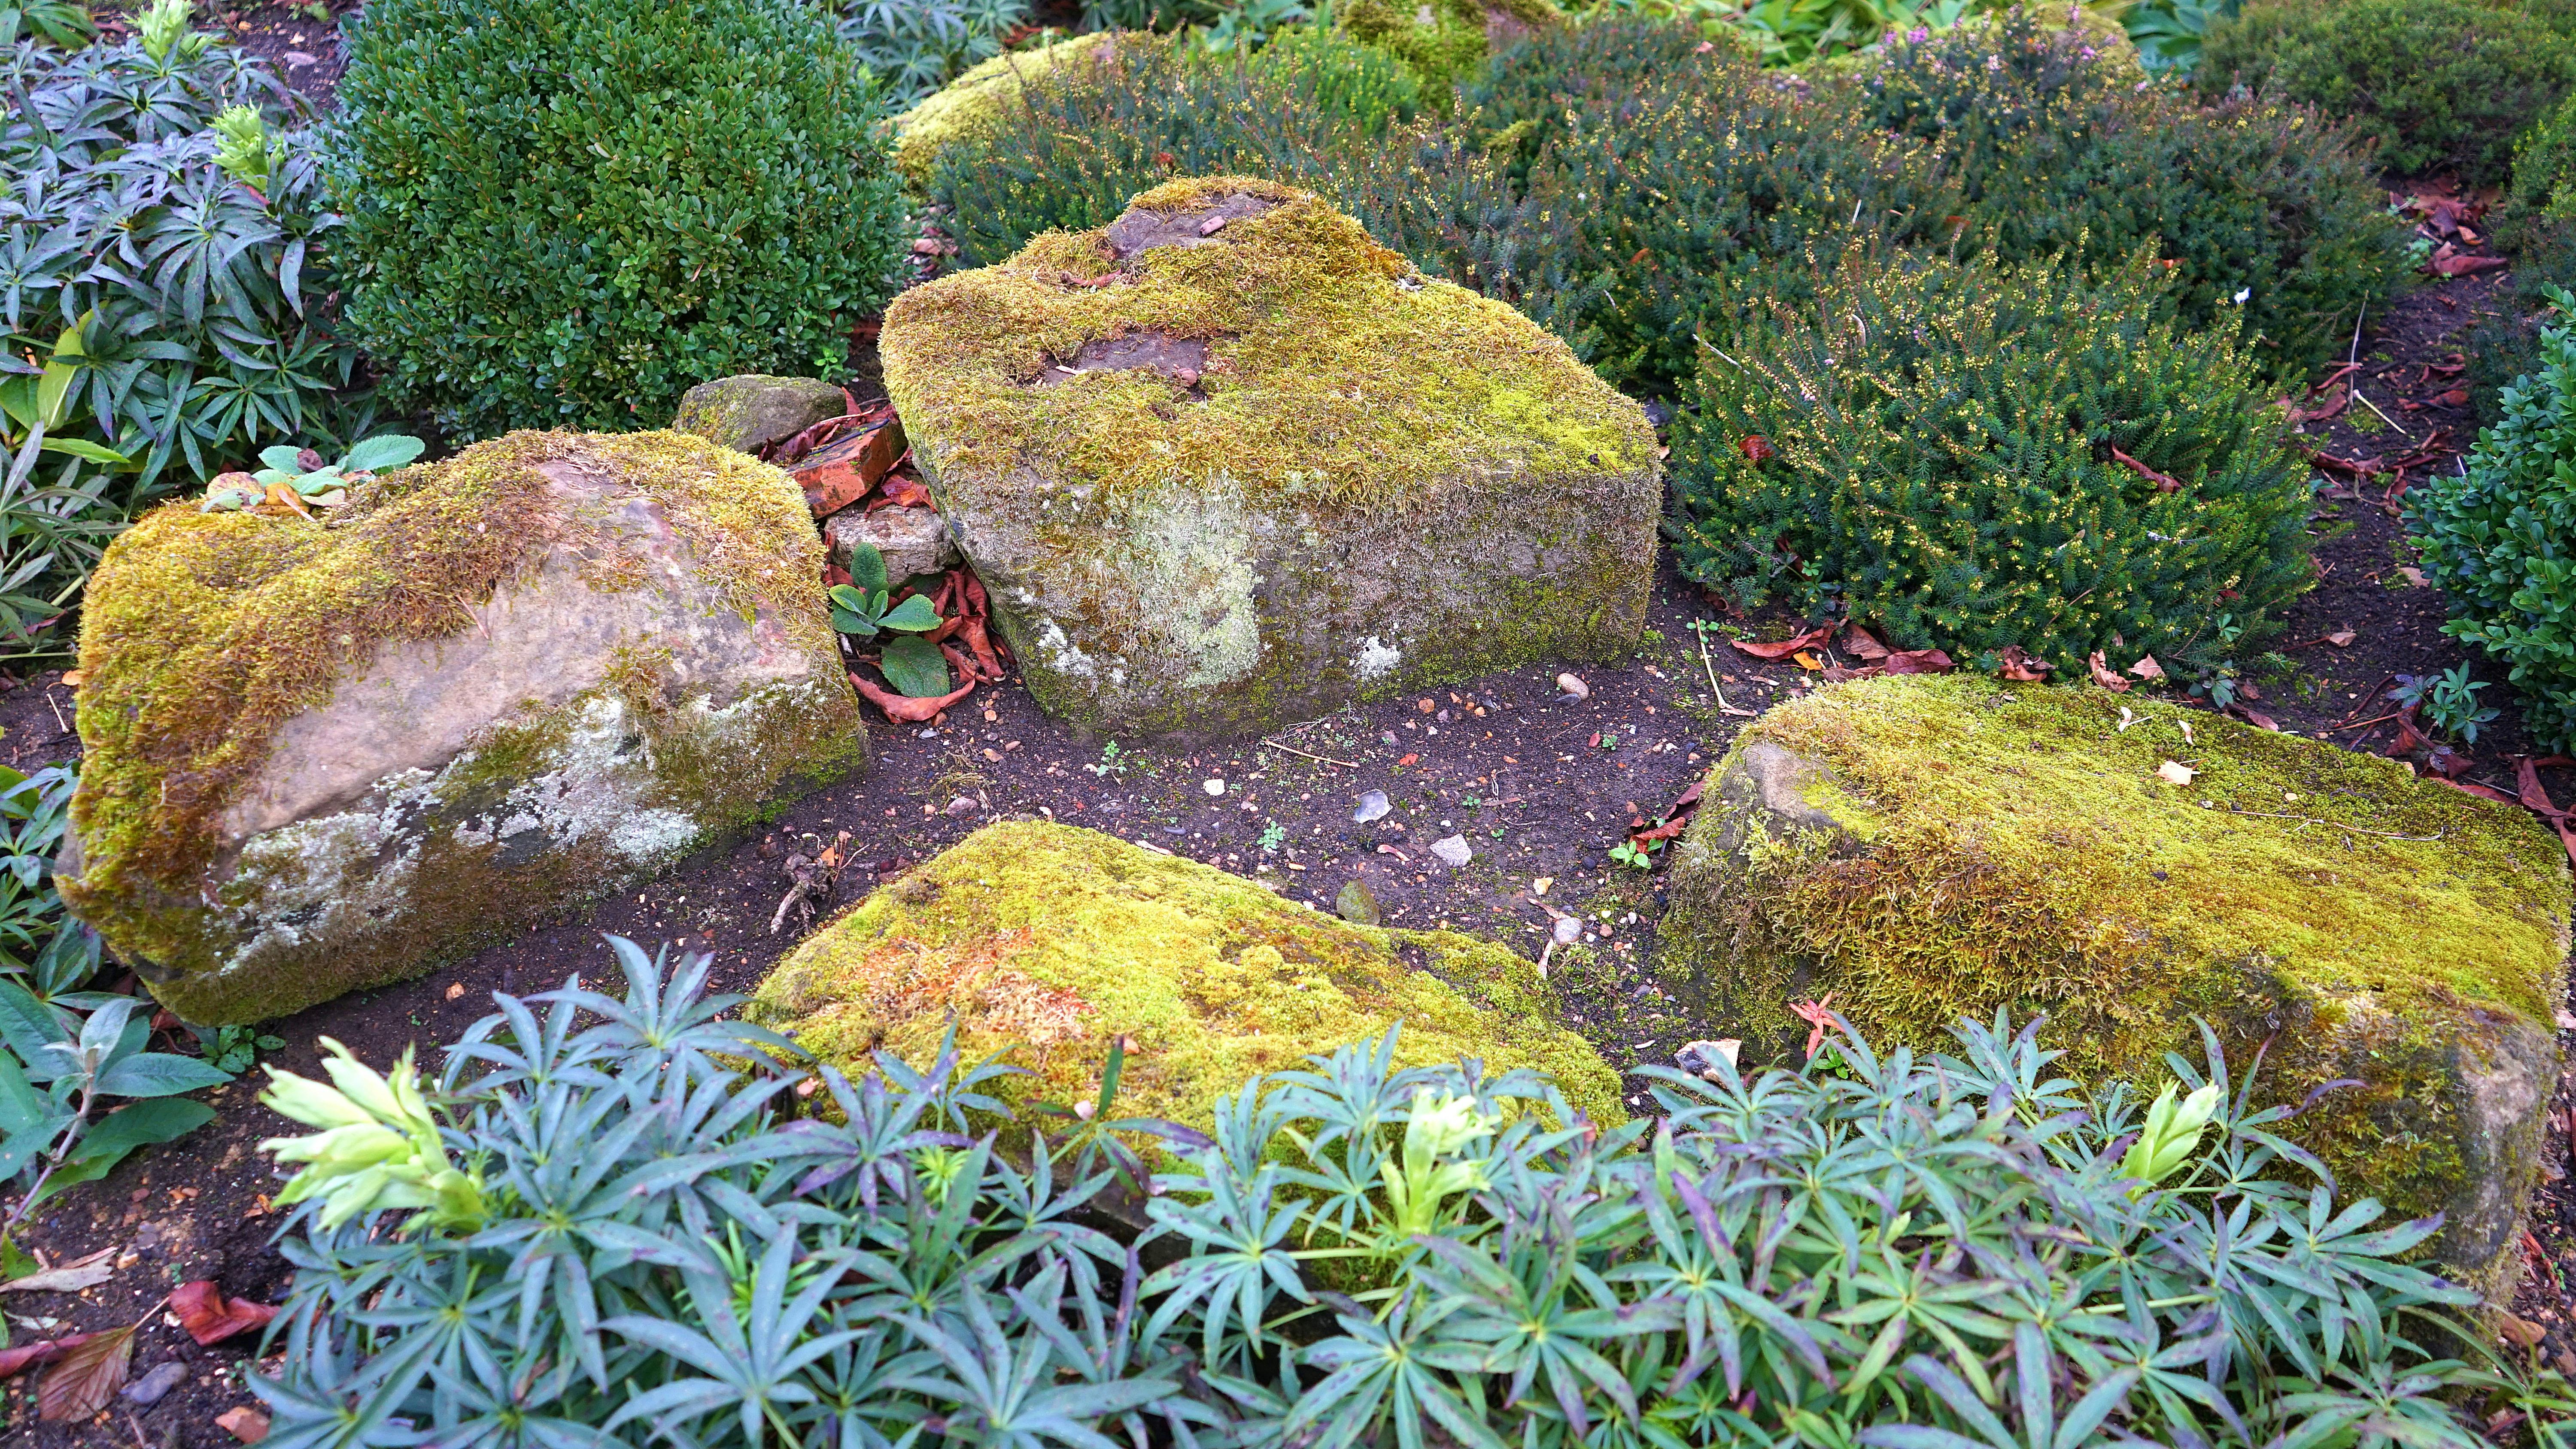 How to stop weeds from growing in rocks